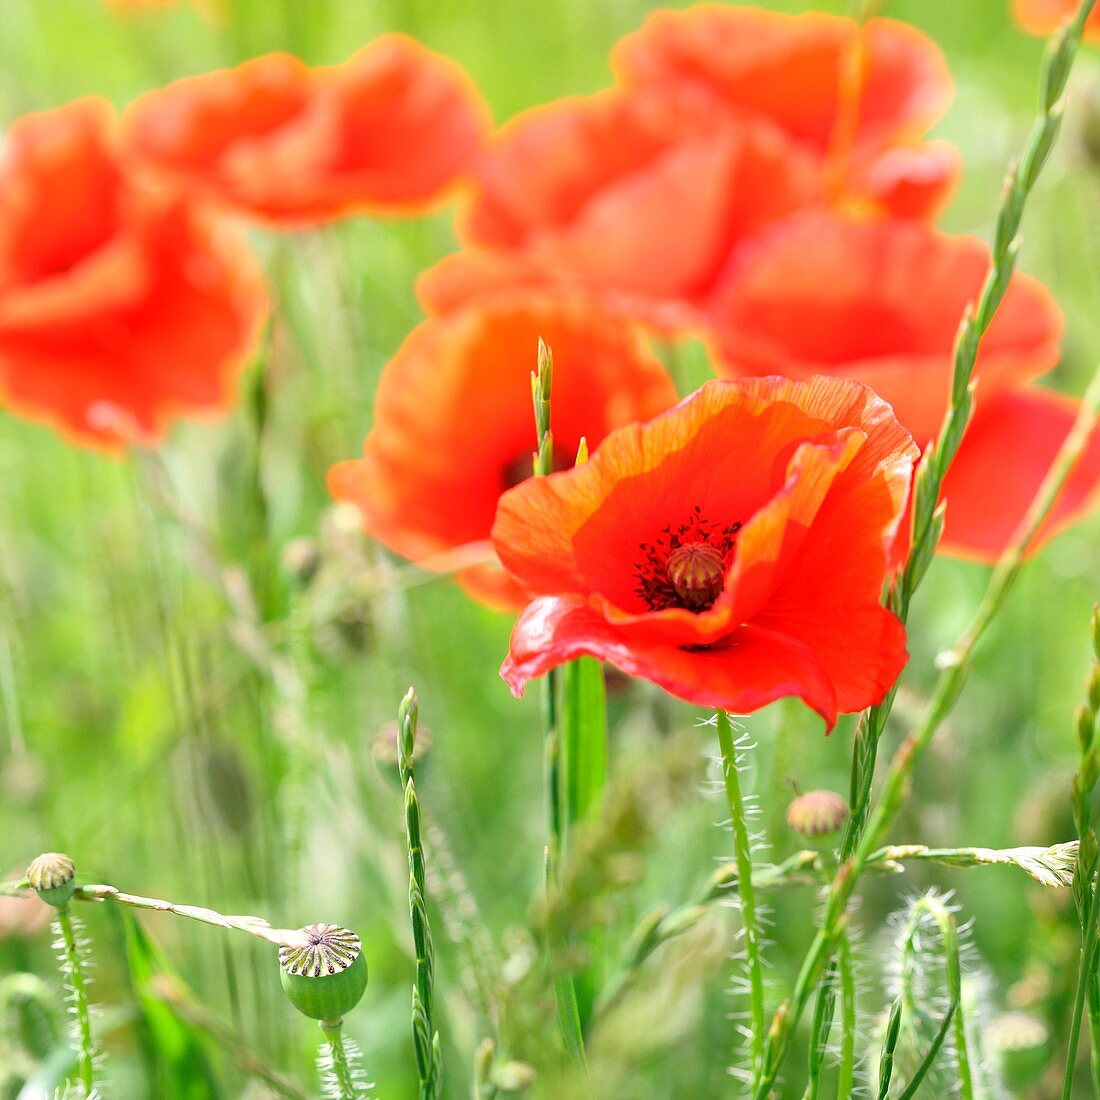 Red Poppies a Delightful Summer Scene